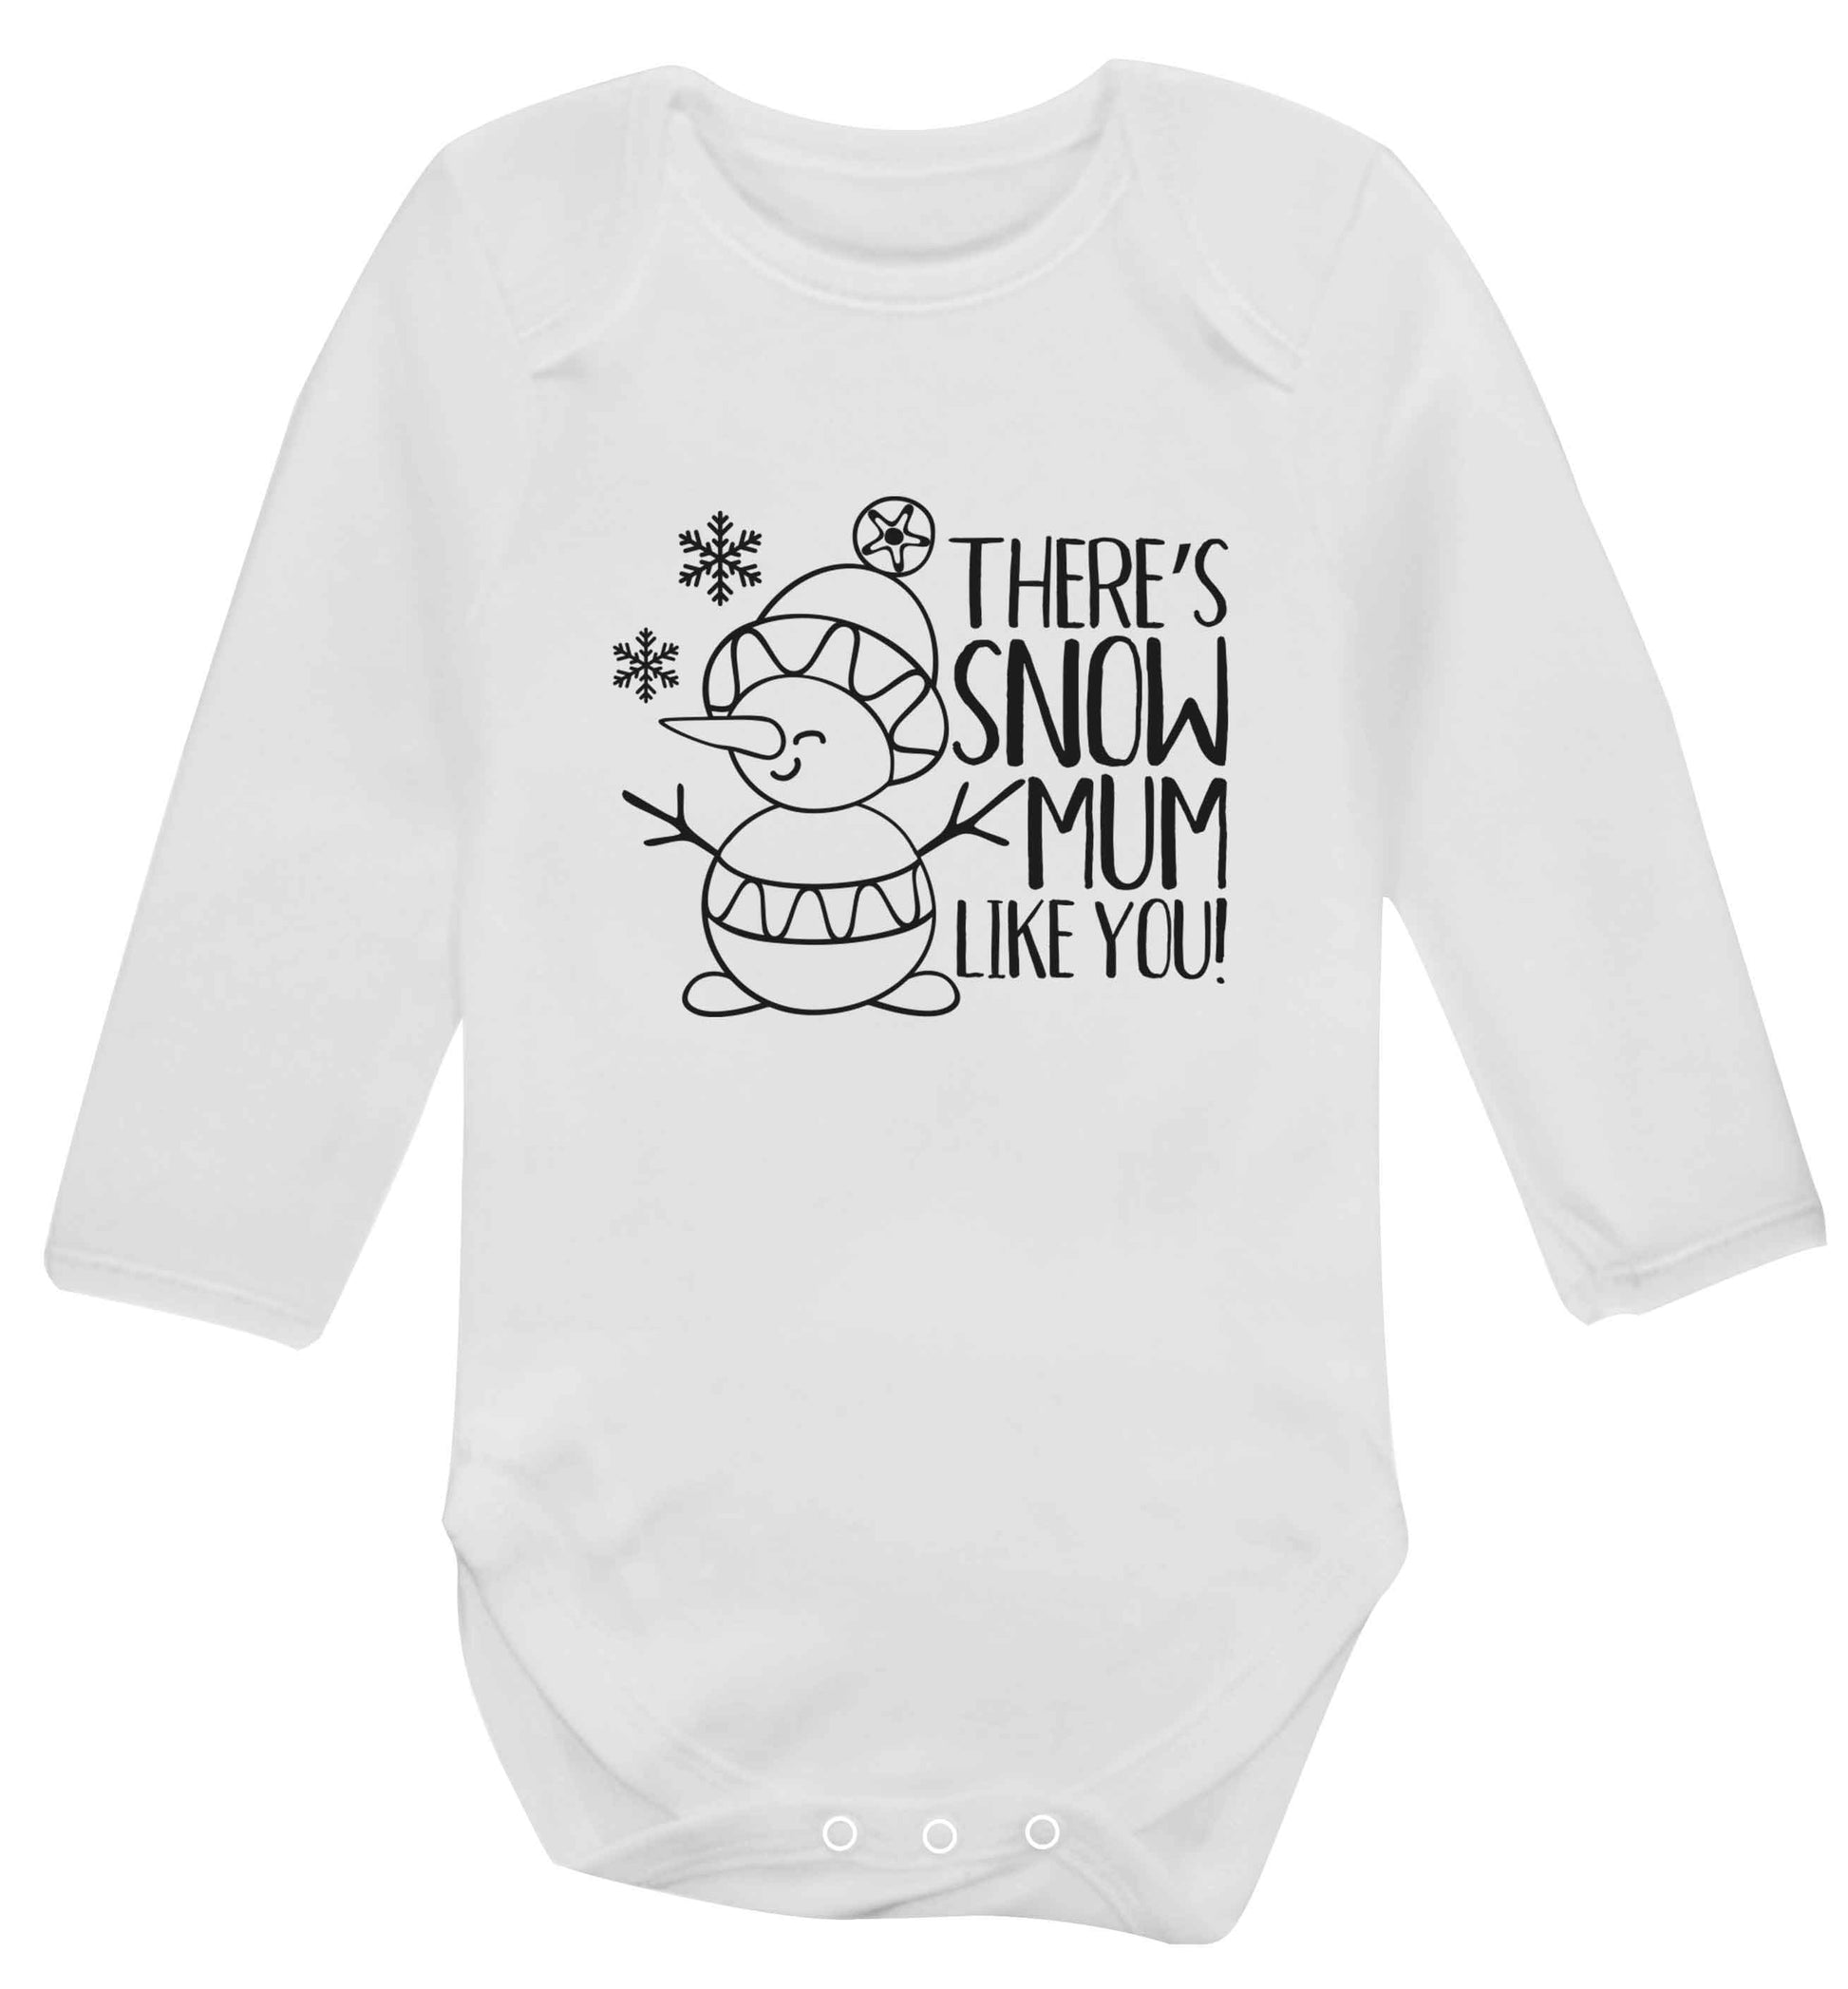 There's snow mum like you baby vest long sleeved white 6-12 months